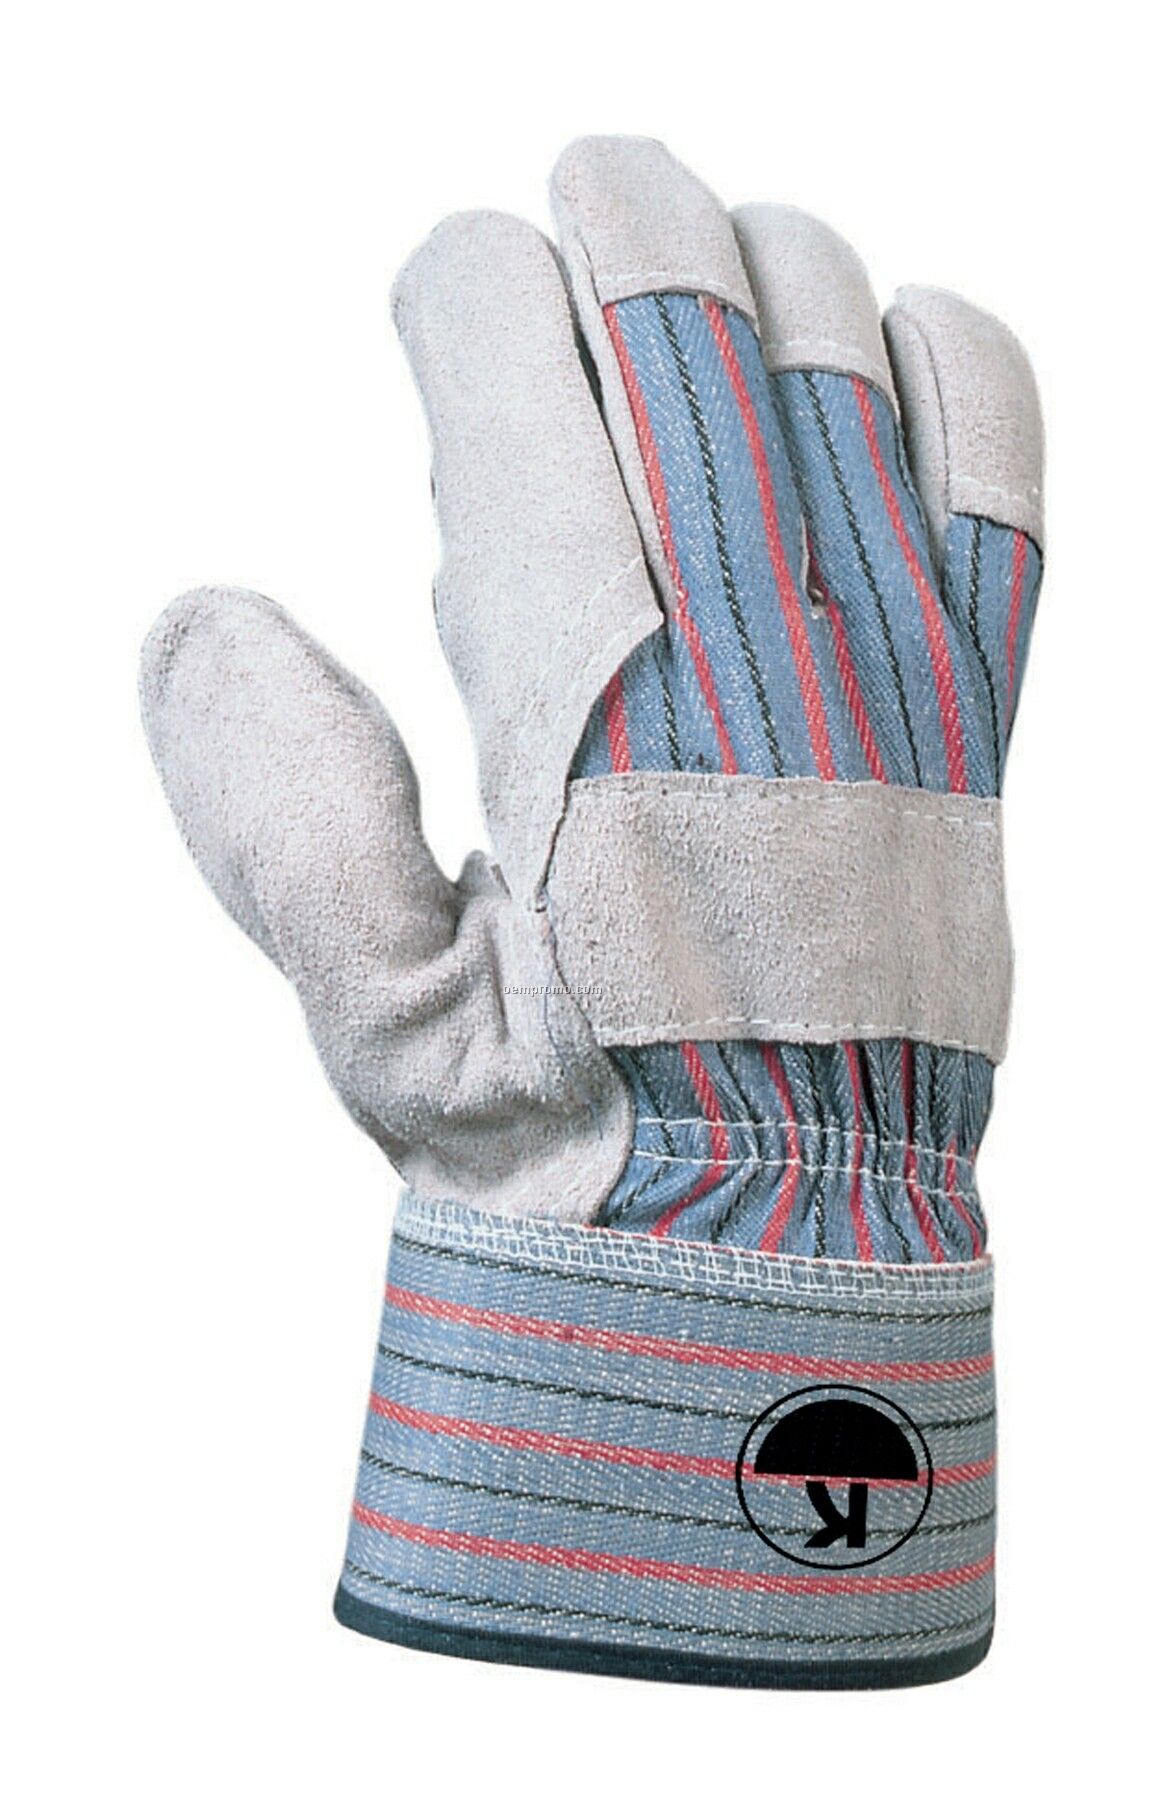 Split Leather Palm Cowhide Glove With Stripe Fabric Back